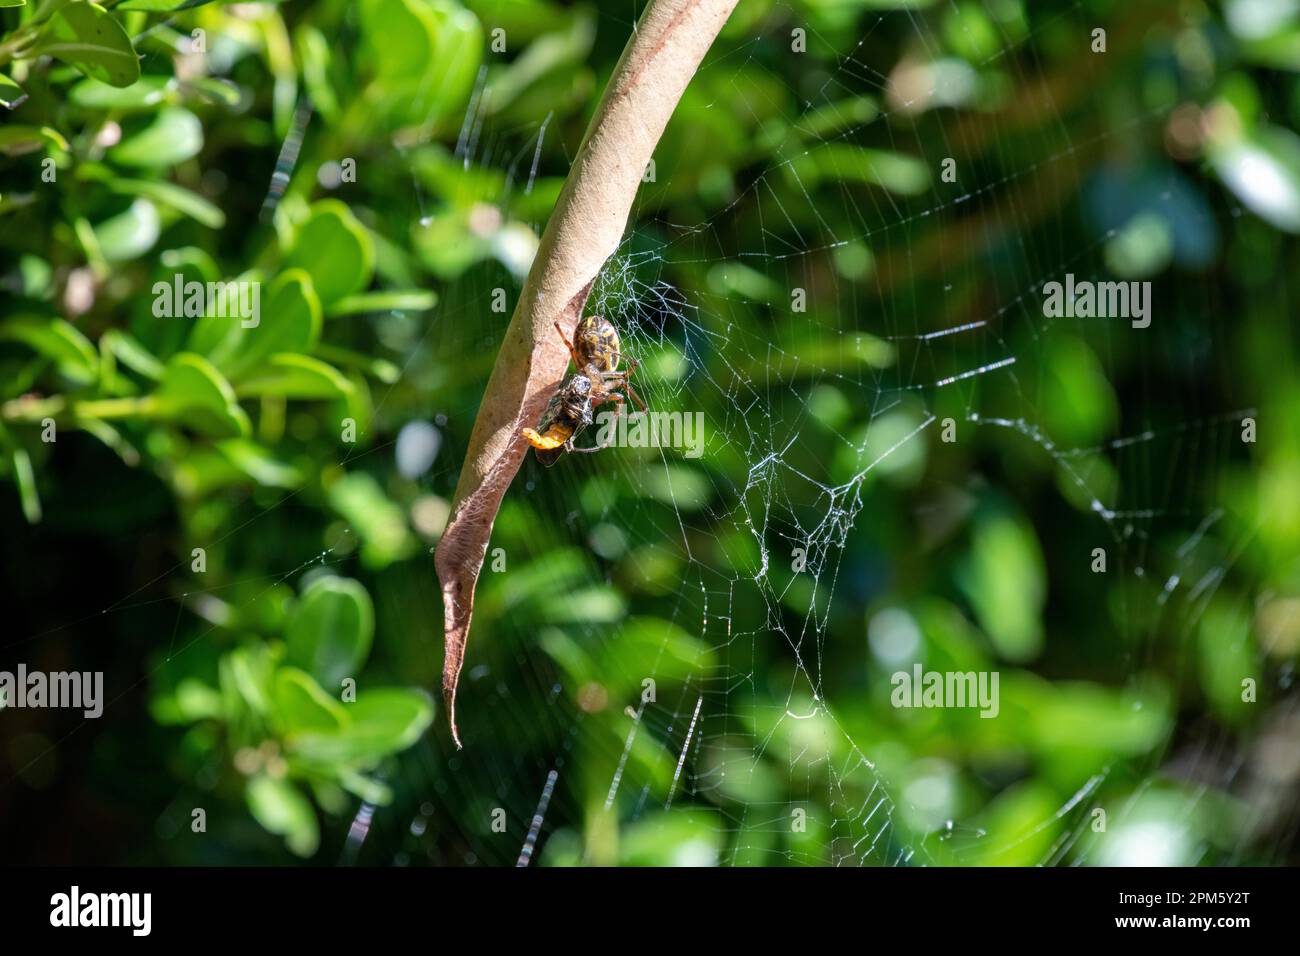 Leaf-Curling Spider (Phonognatha graeffei) catches prey in the web in Sydney, New South Wales, Australia. (Photo by Tara Chand Malhotra) Stock Photo